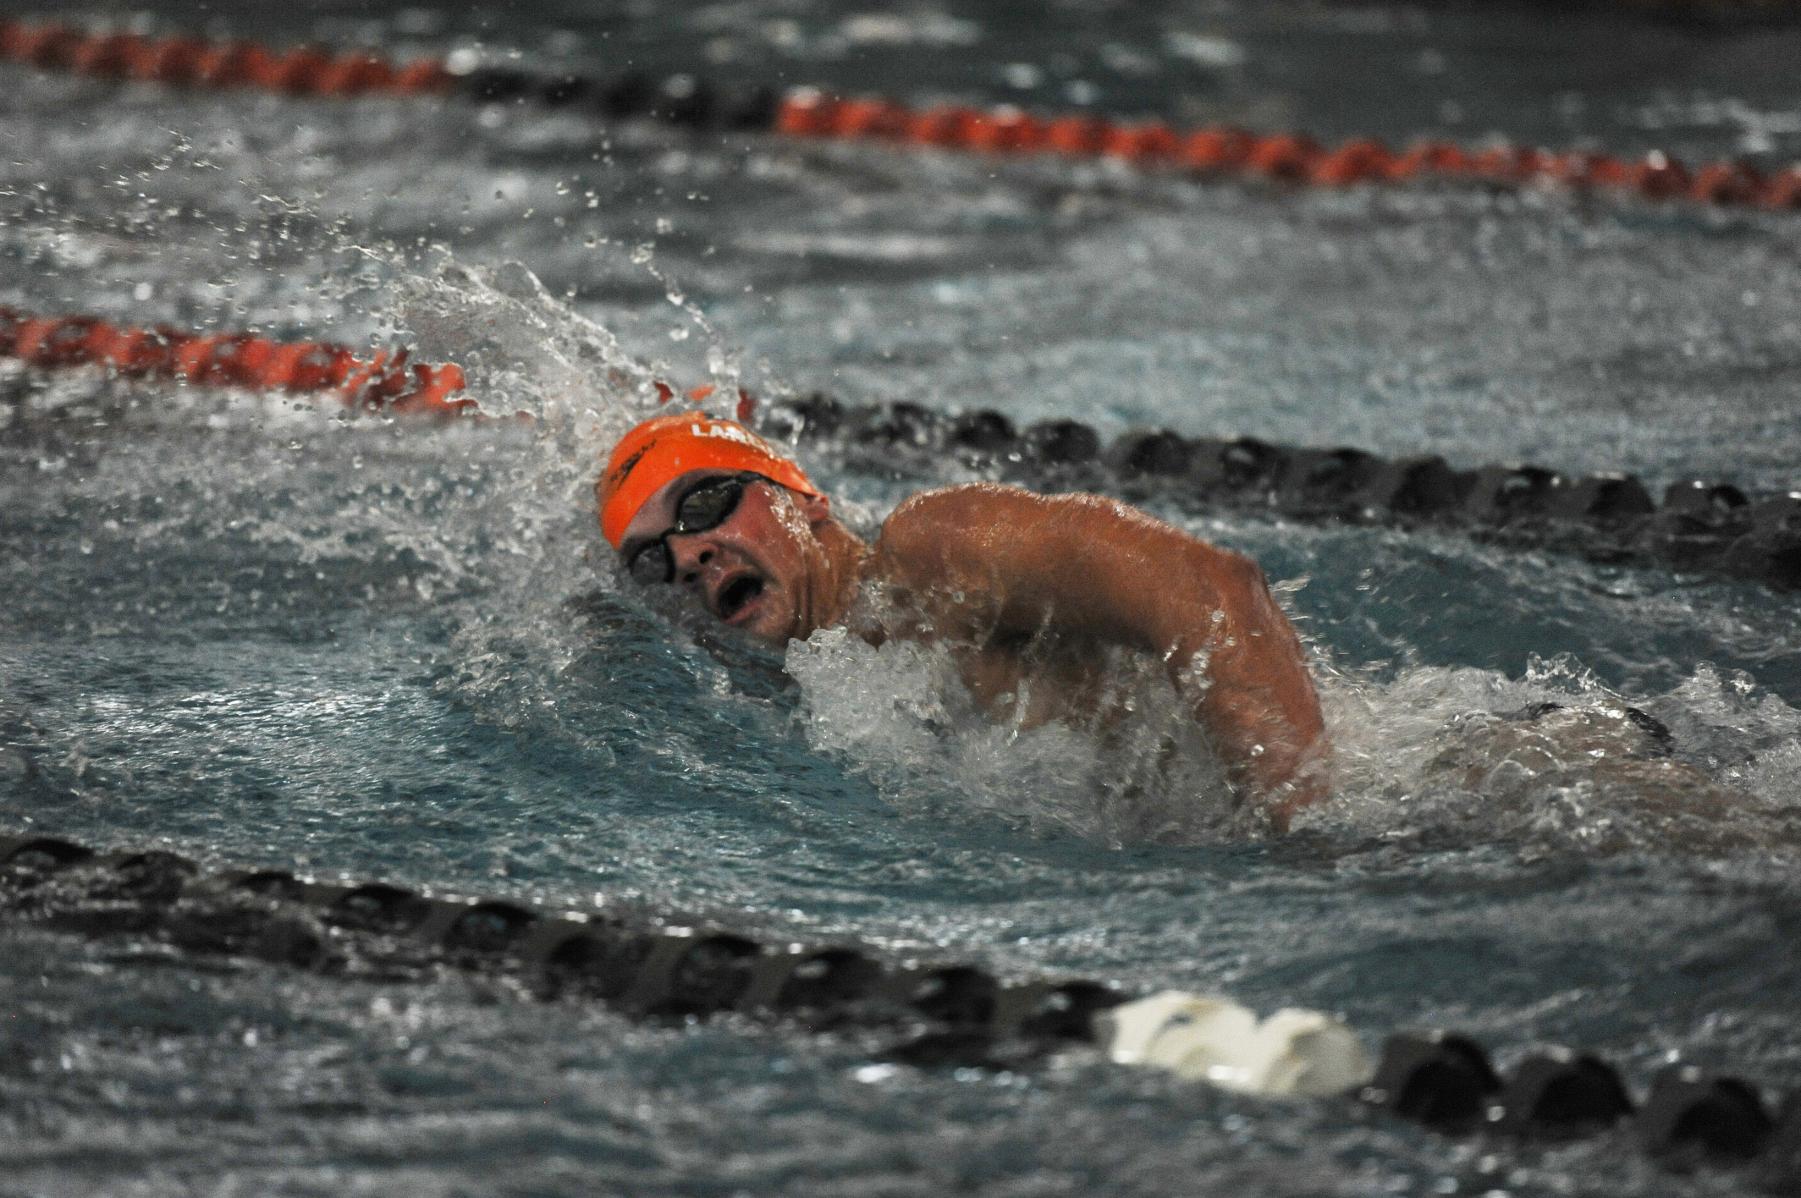 Carson-Newman in second-place after impressive day one of Nova Invitational